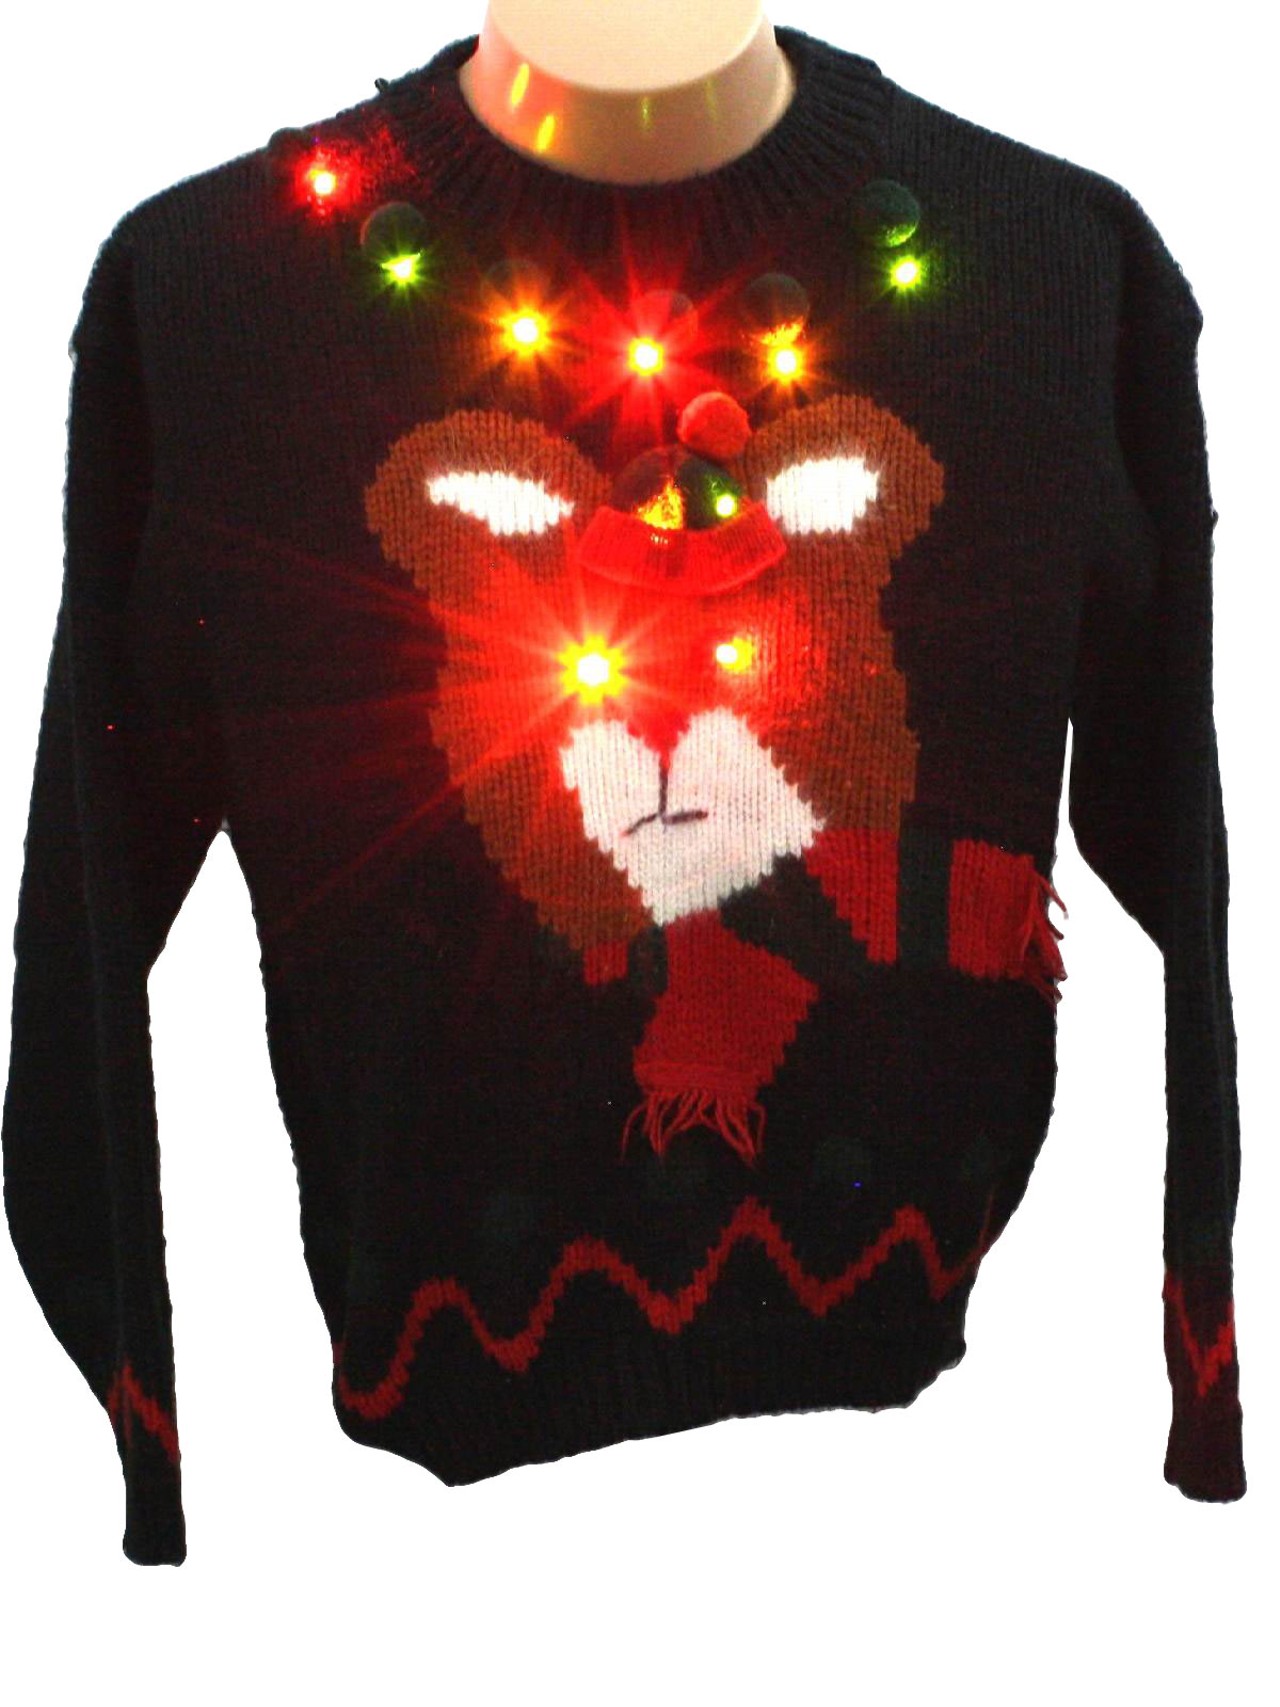 This bear’s laser eyes hone in on holiday cheer.